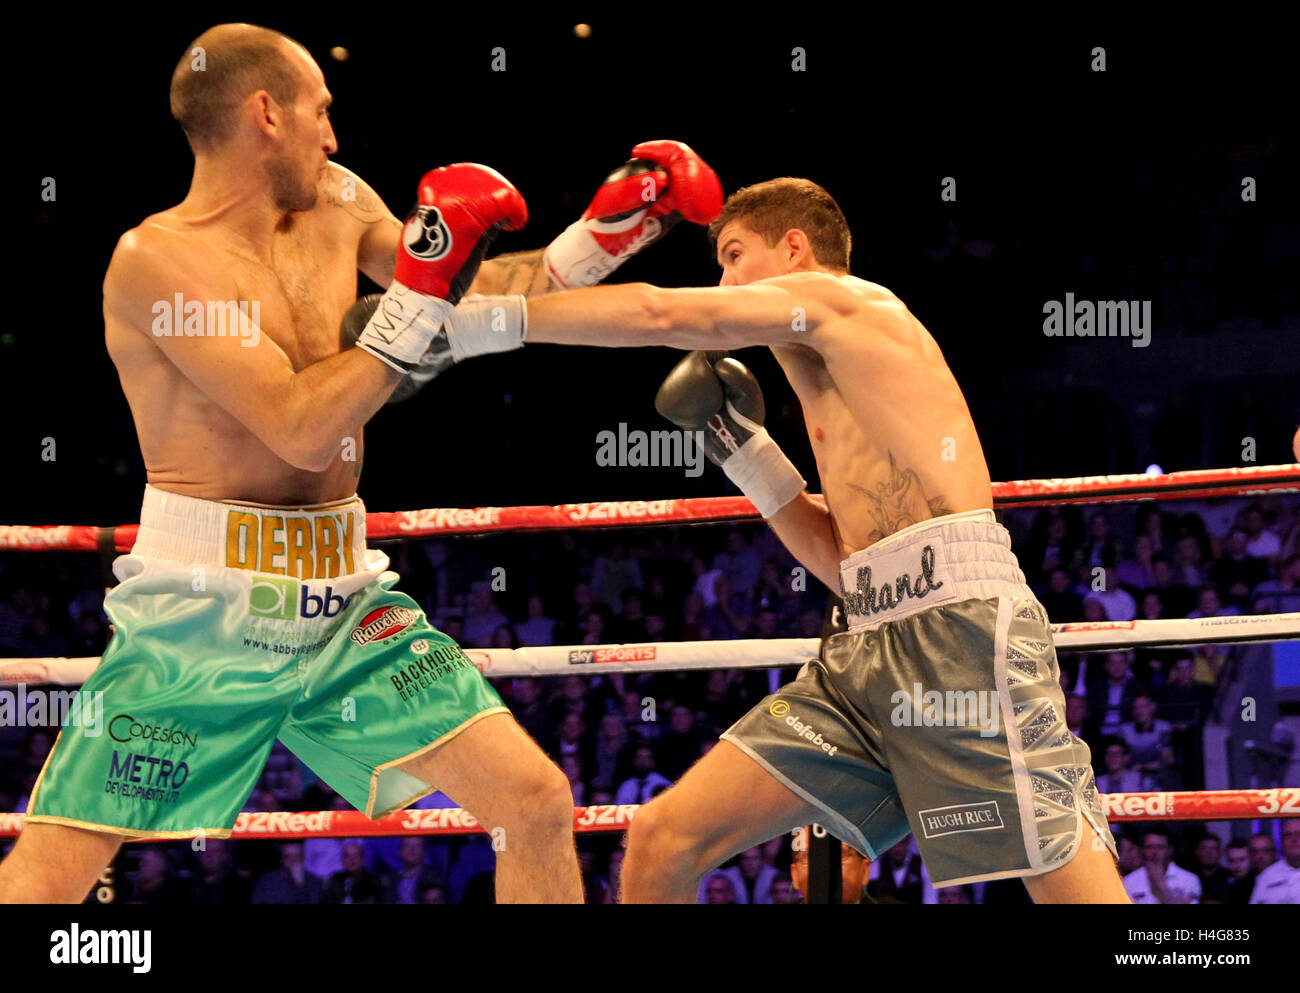 Echo Arena, Liverpool , UK 15th October 2016. Tony Bellew v BJ Flores Matchroom Boxing Fight Night.  Luke Campbell (Hull)  vs  Derry Mathews (Liverpool) during the WBC Silver International Lightweight Championship bout at Echo Arena, Liverpool  Credit: Stephen Gaunt/Touchlinepics.com/Alamy Live News Stock Photo